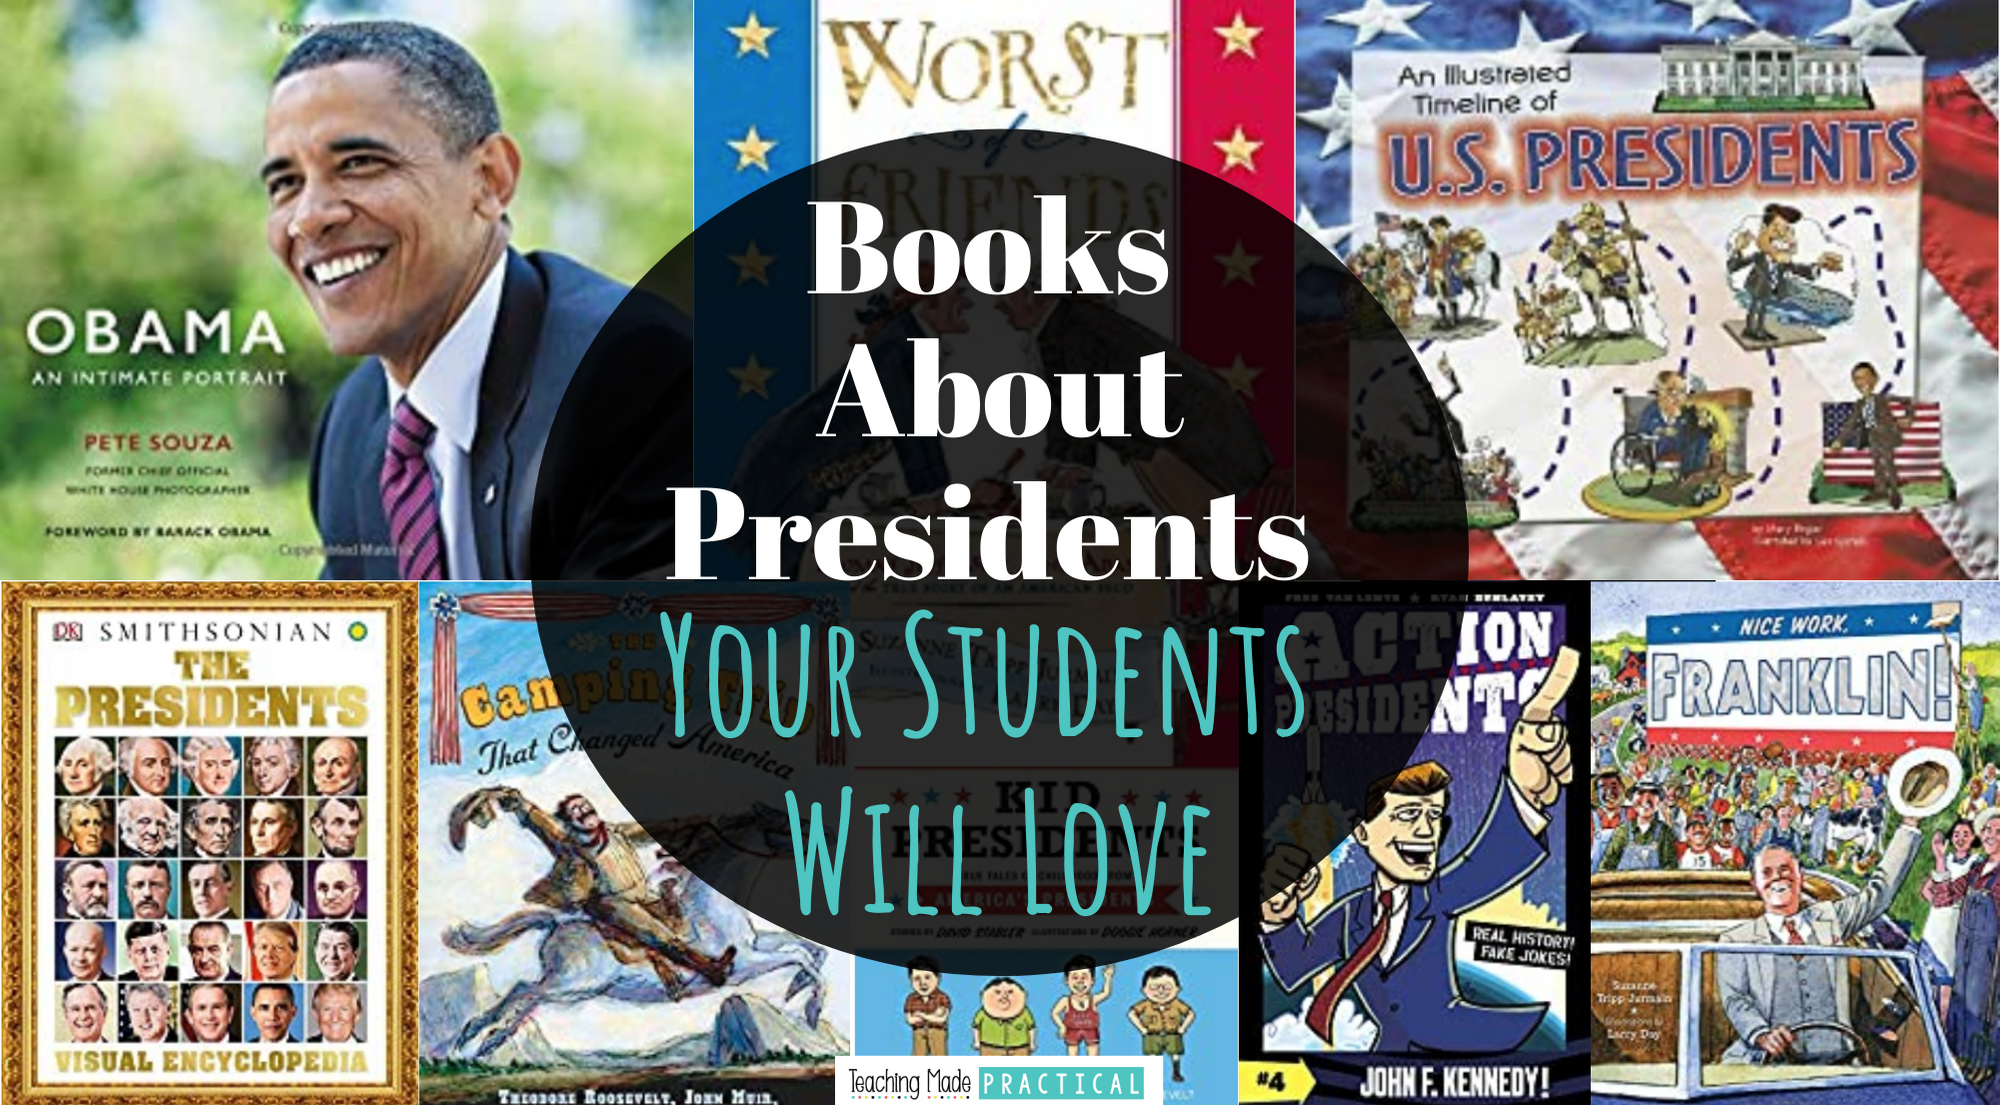 biographies of U.S. Presidents to read aloud to 3rd, 4th, and 5th grade students